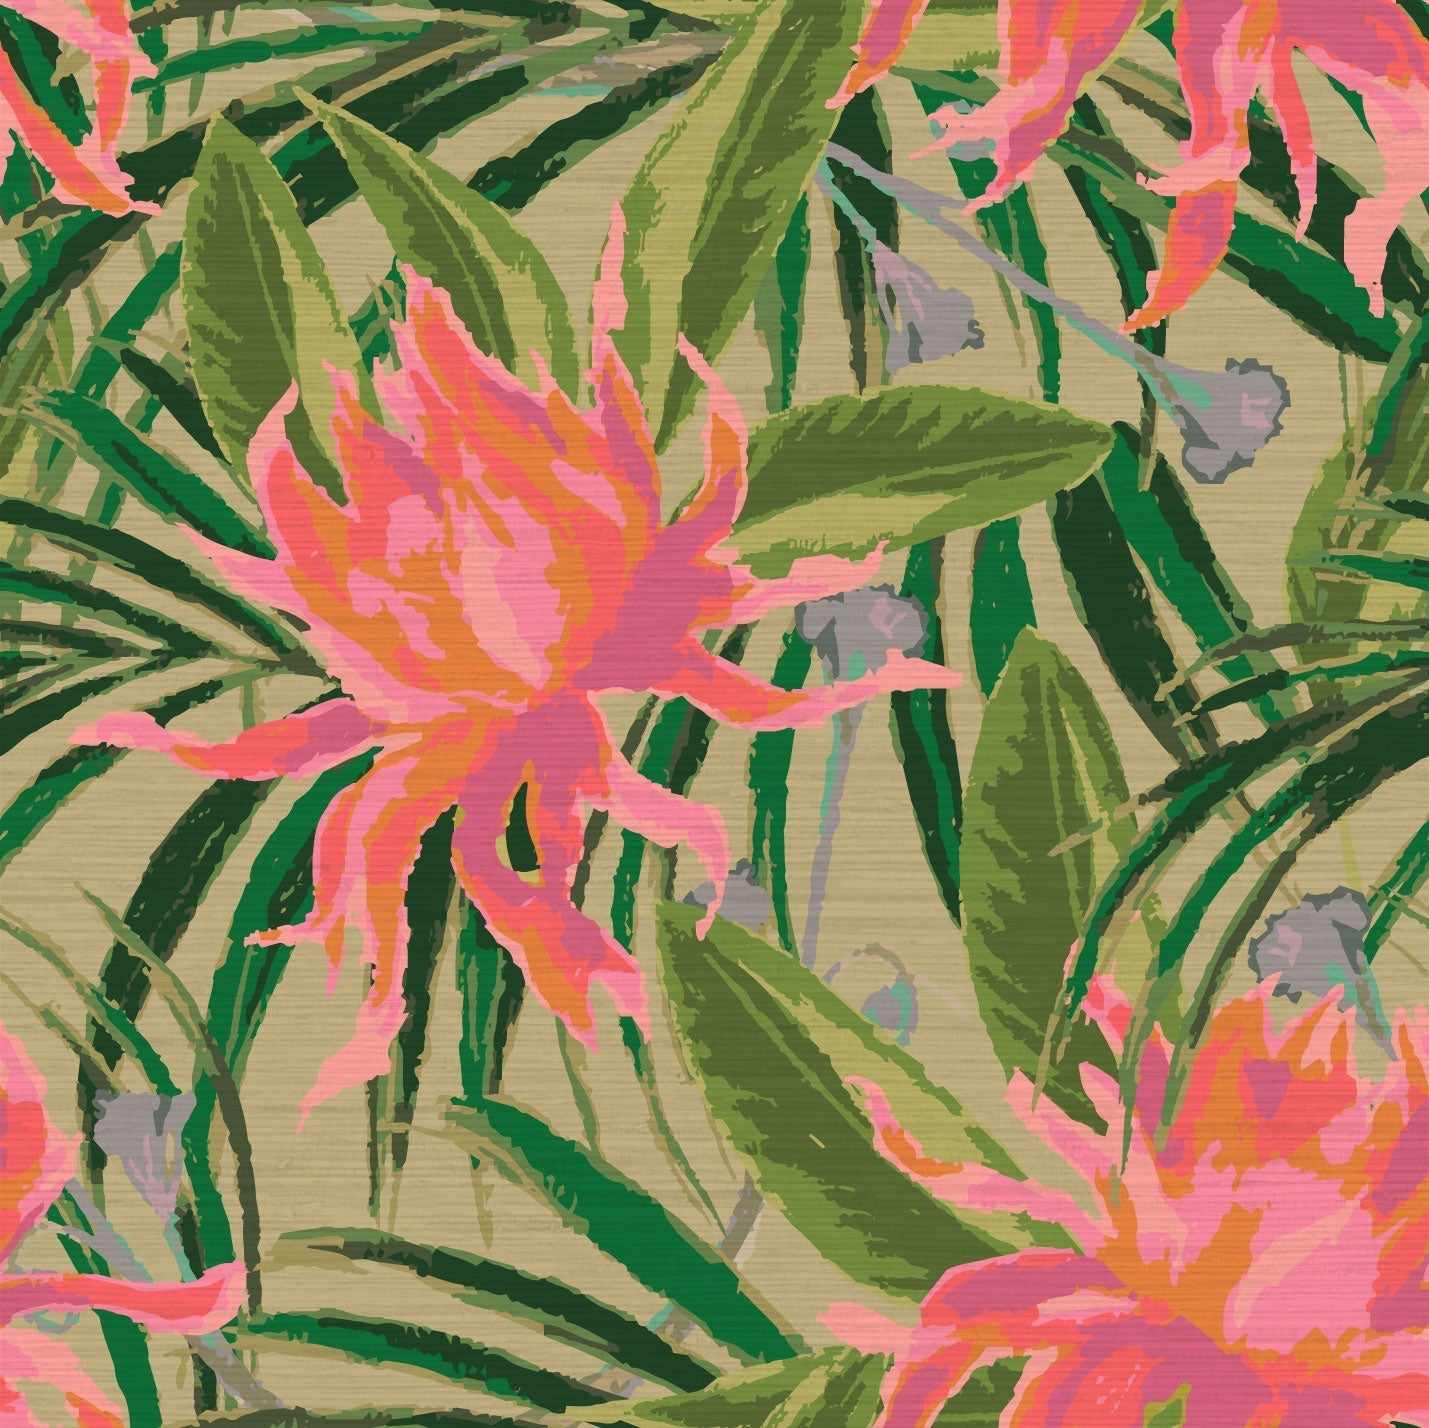 grasscloth wallpaper with olive green based featuring oversized painterly tropical flowers and palm leafs in striking shades of pink, orange and lavender and leafs in shades of deep green